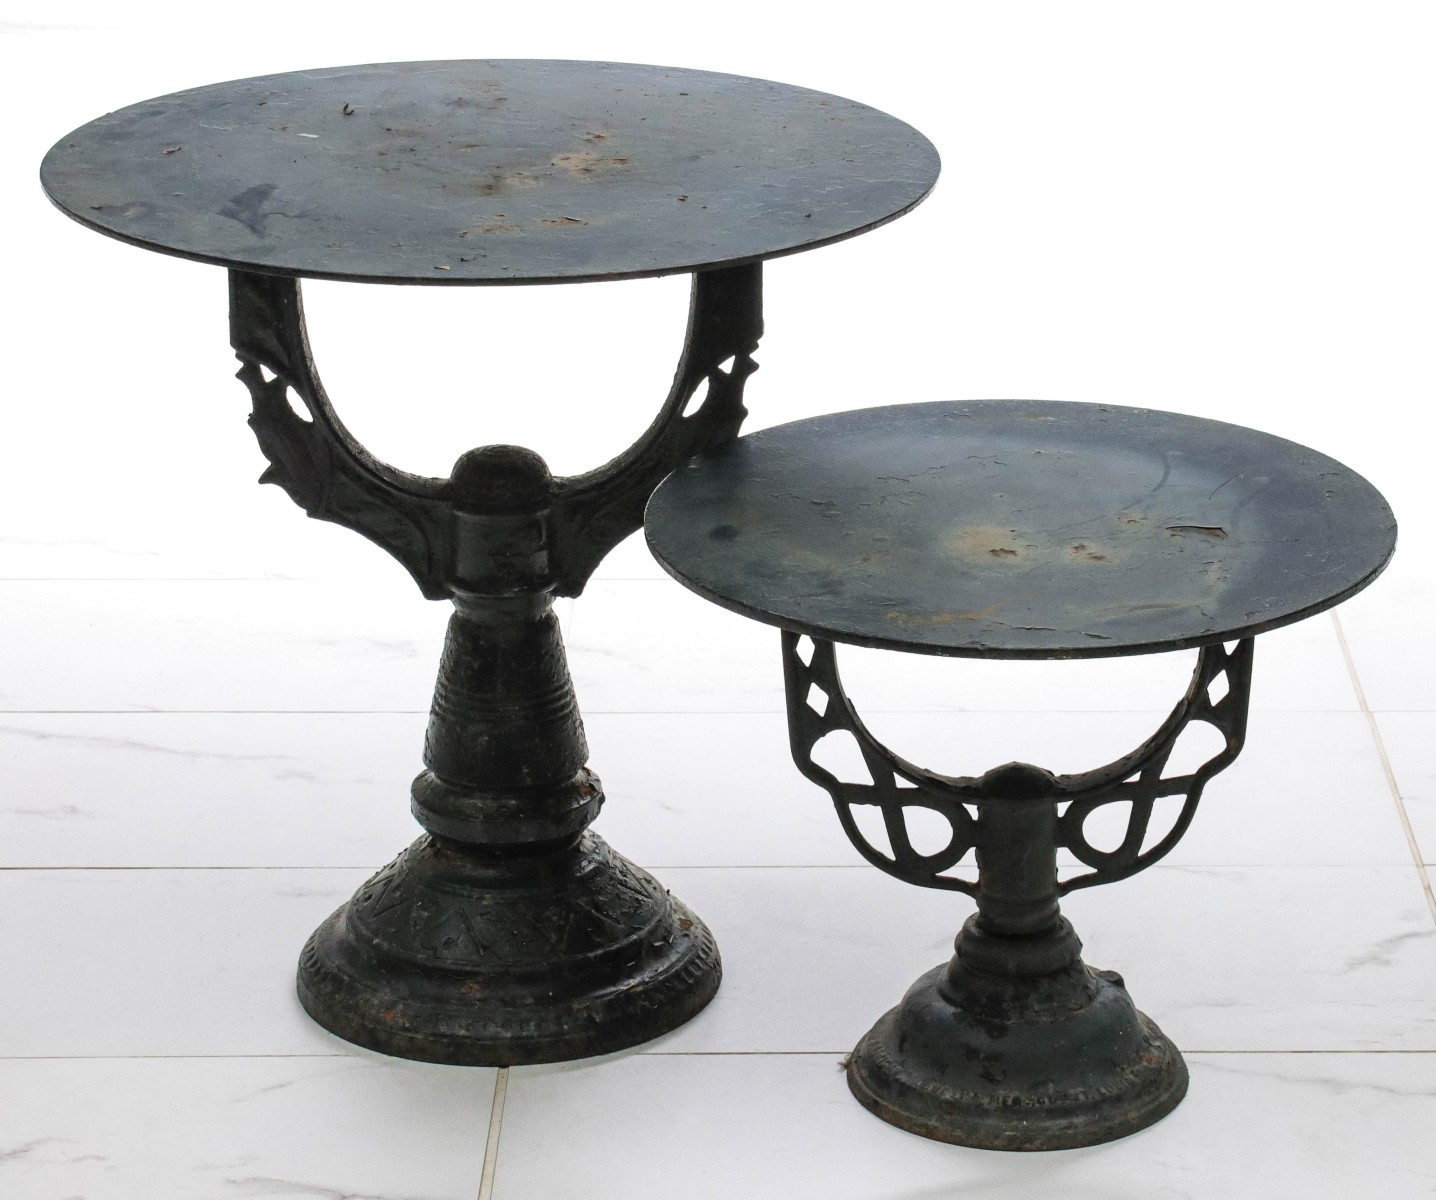 TWO YOKE BASE CAST IRON STANDS WITH CIRCULAR TOP